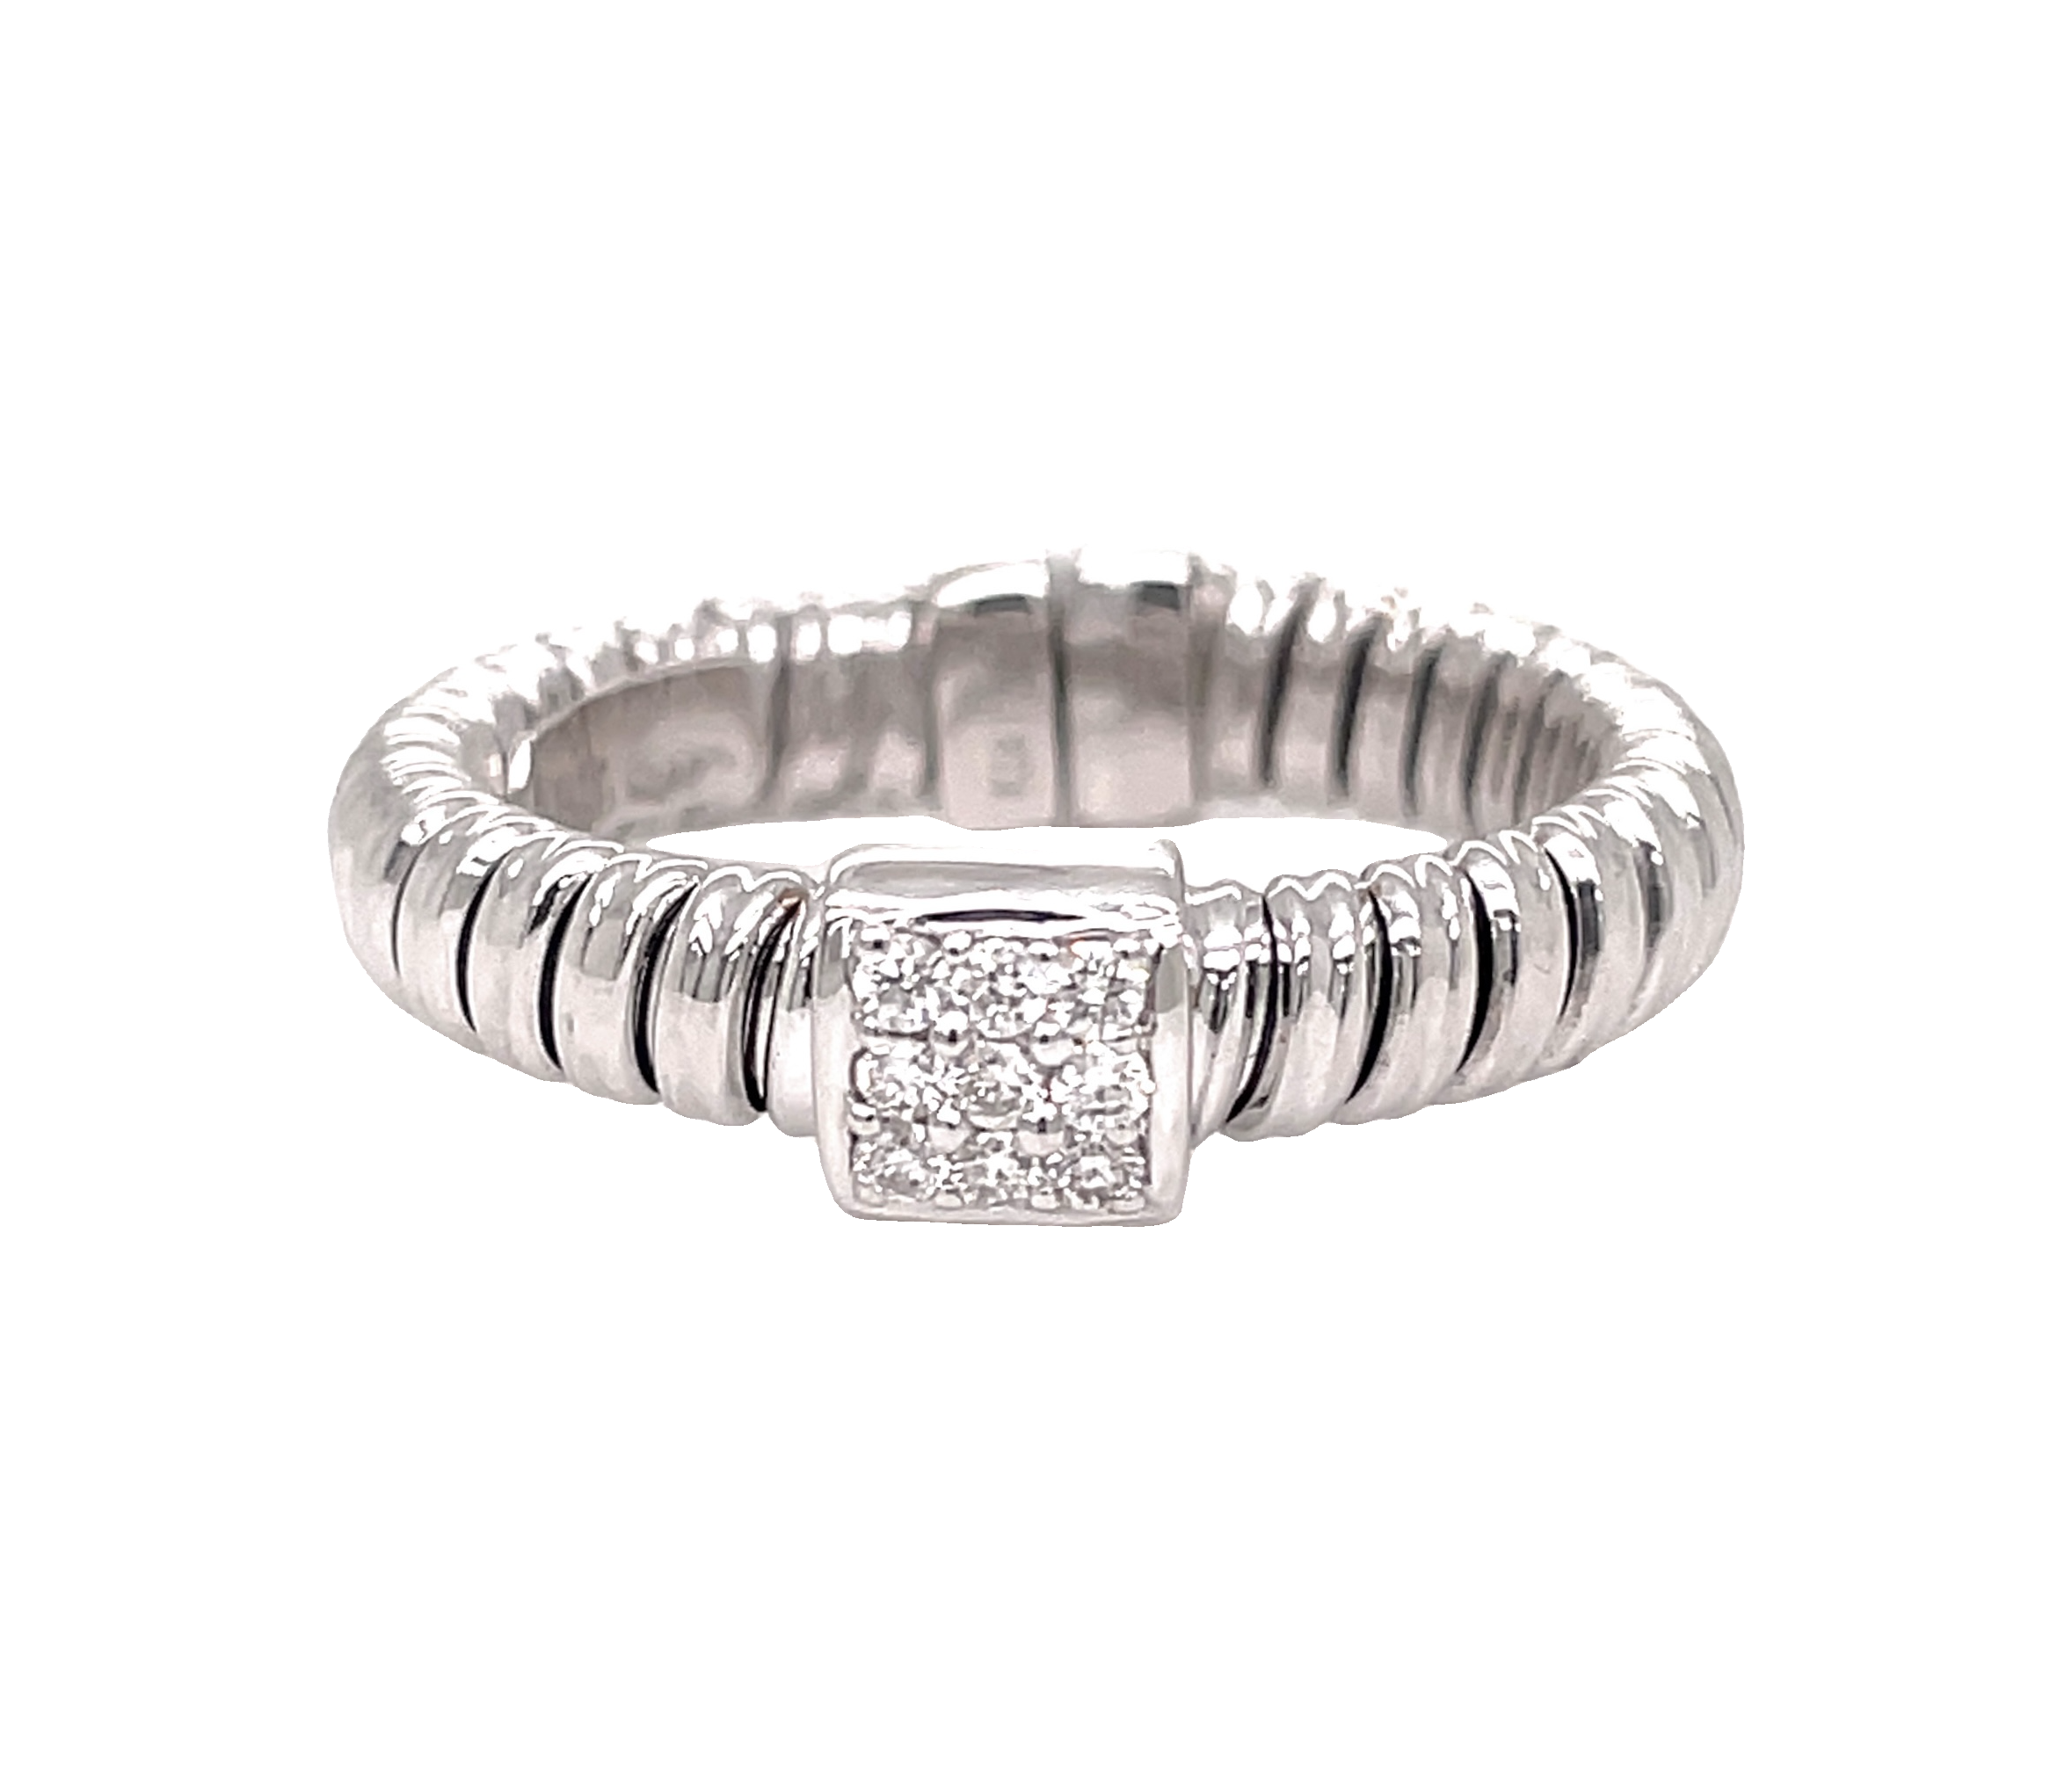 Unique Tubogas technique grants flexibility to this astonishing ring. Crafted with 18K white gold, the classic yet contemporary motif features 0.07 cts of round diamonds, resulting in a 4.50 mm wide ring in a 6.5 size.